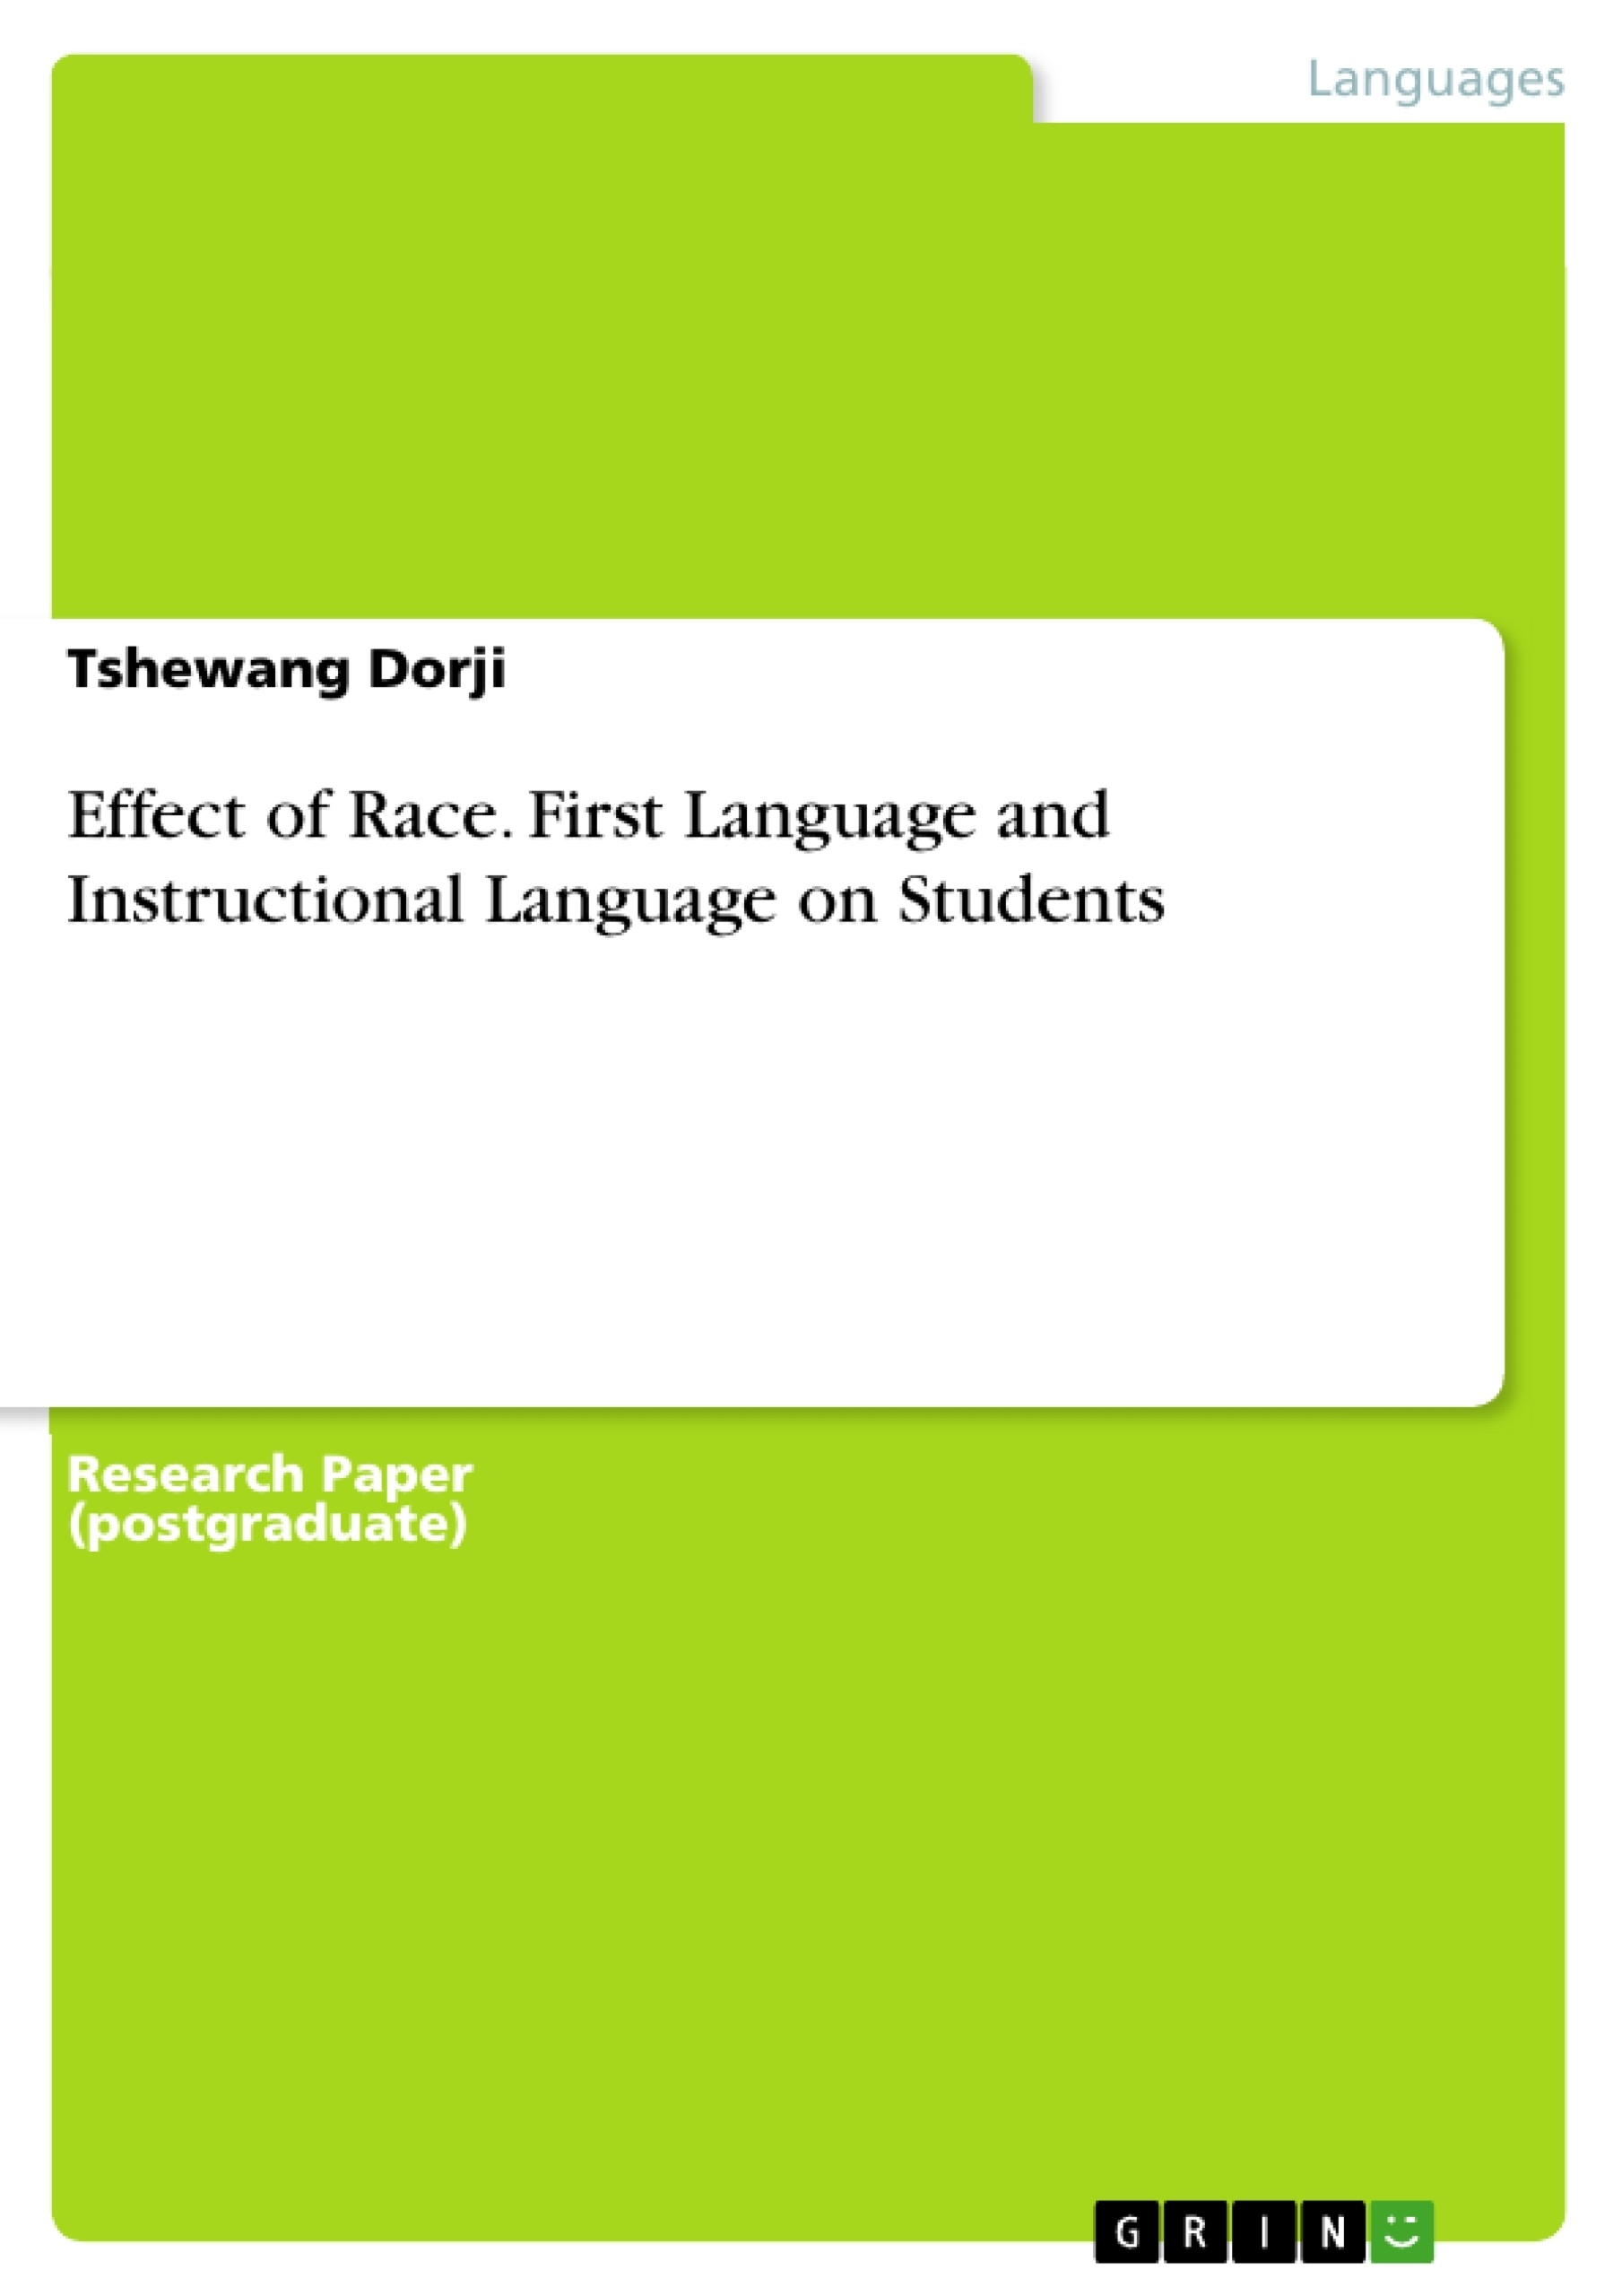 Title: Effect of Race. First Language and Instructional Language on Students